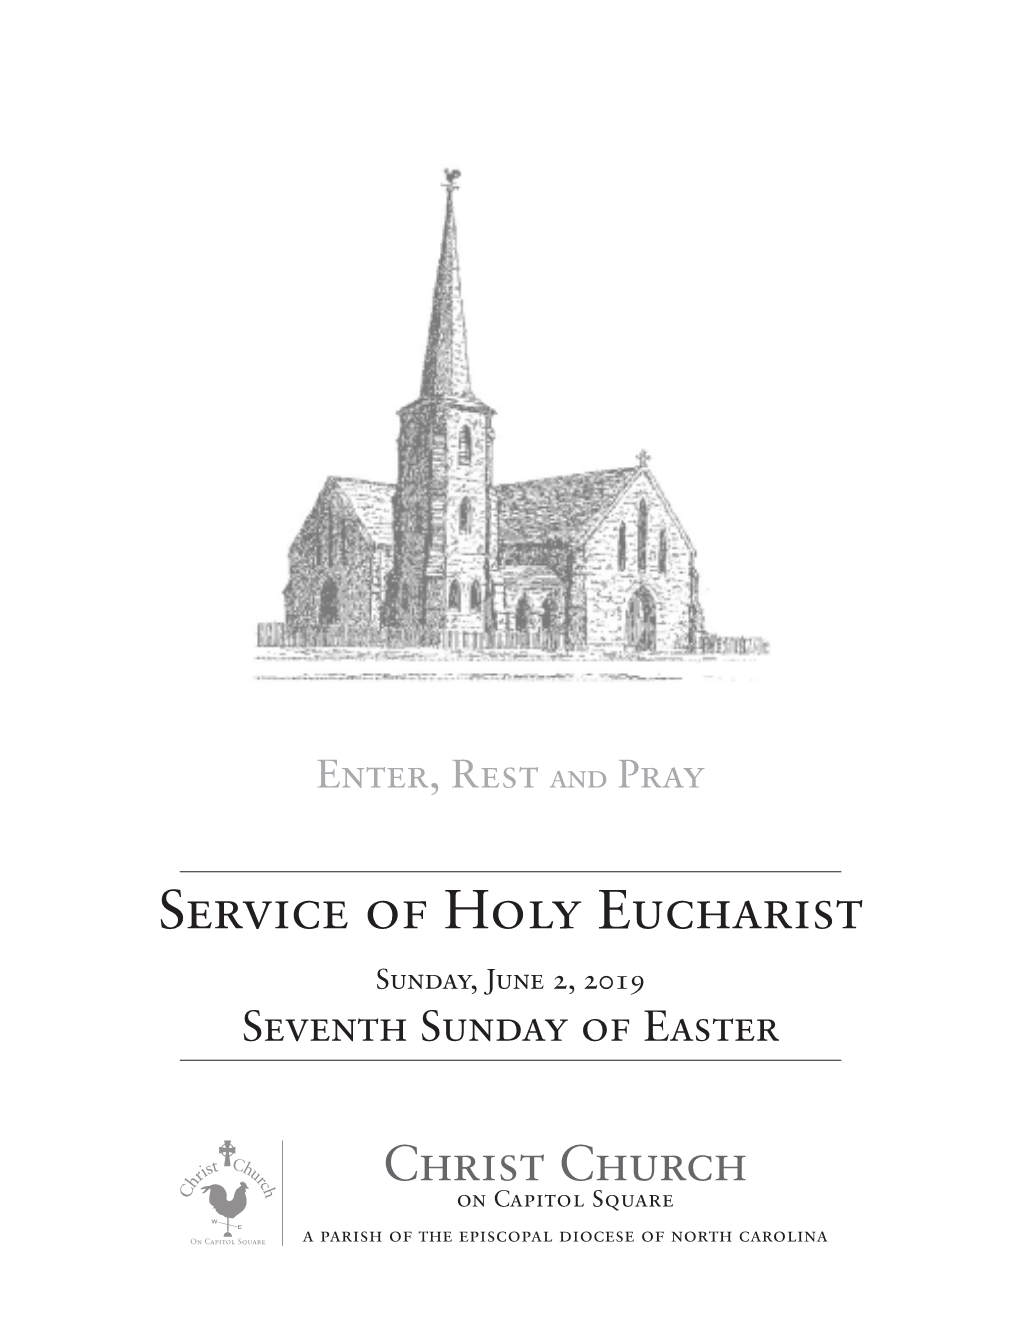 Service of Holy Eucharist Sunday, June 2, 2019 Seventh Sunday of Easter